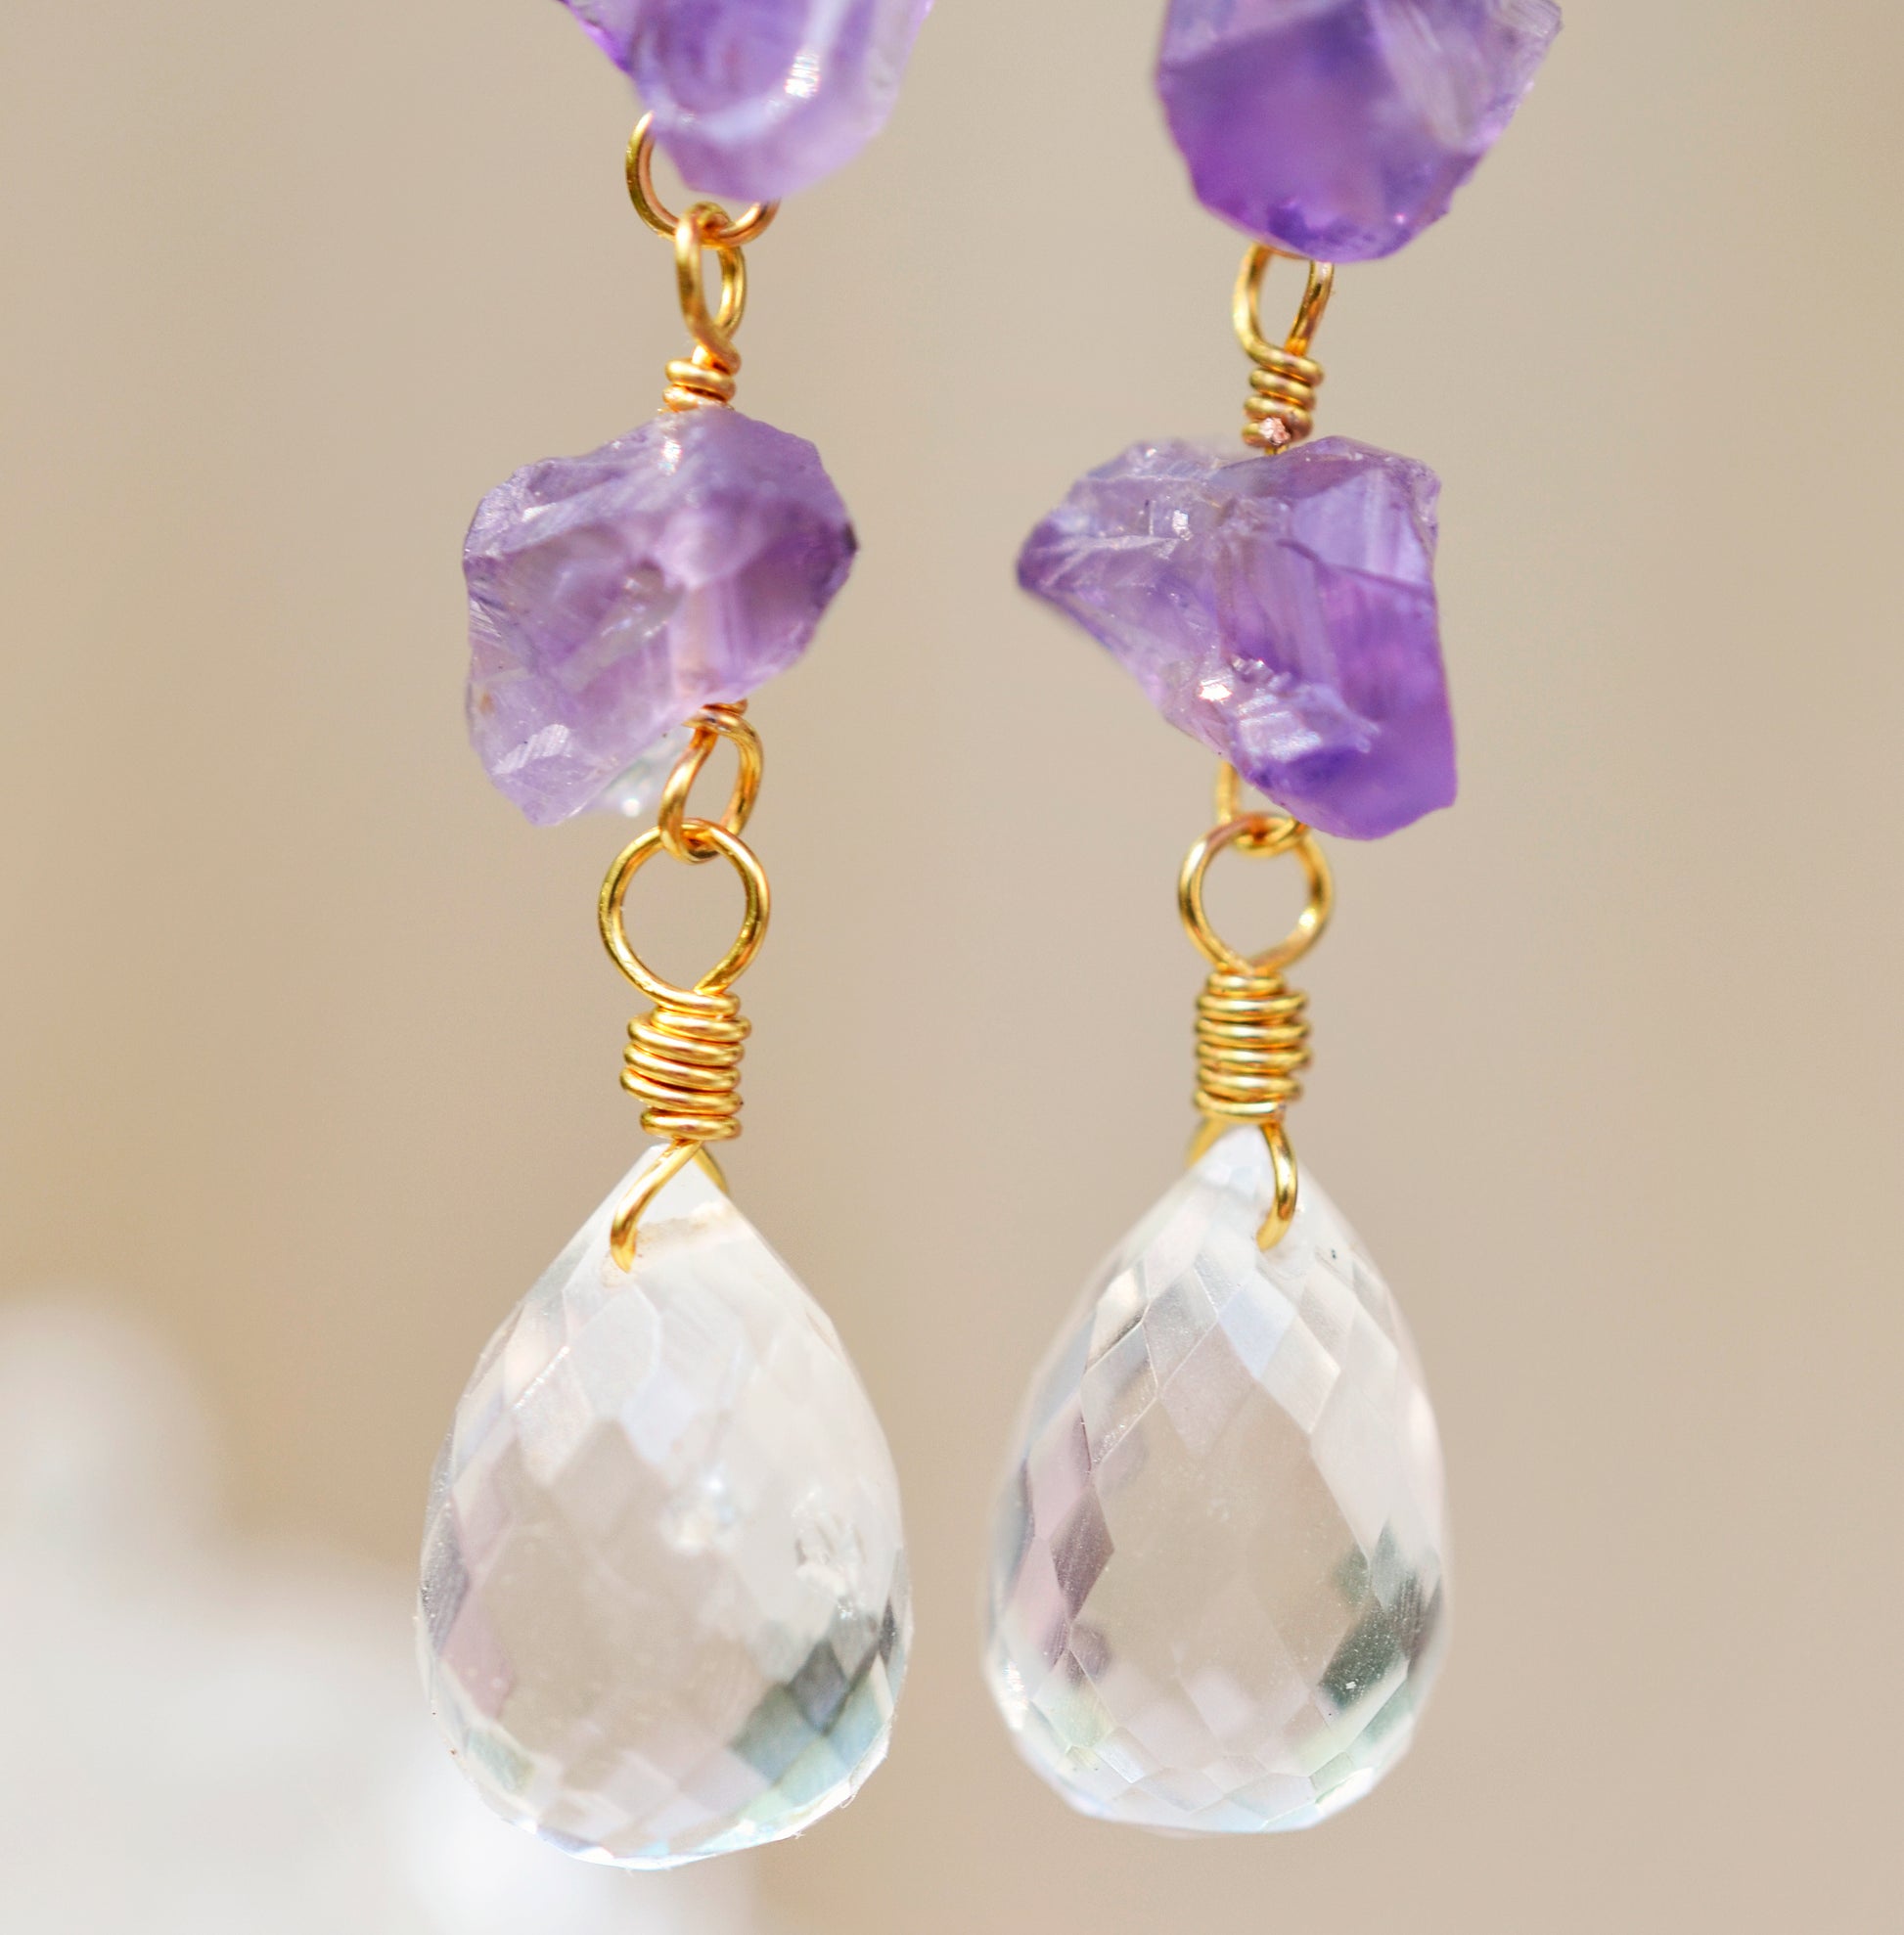 Raw Amethyst and Crystal Quartz Earrings, 14k Gold Filled or Sterling Silver, Natural Crystal Gemstone Dangles, February Birthstone Jewelry